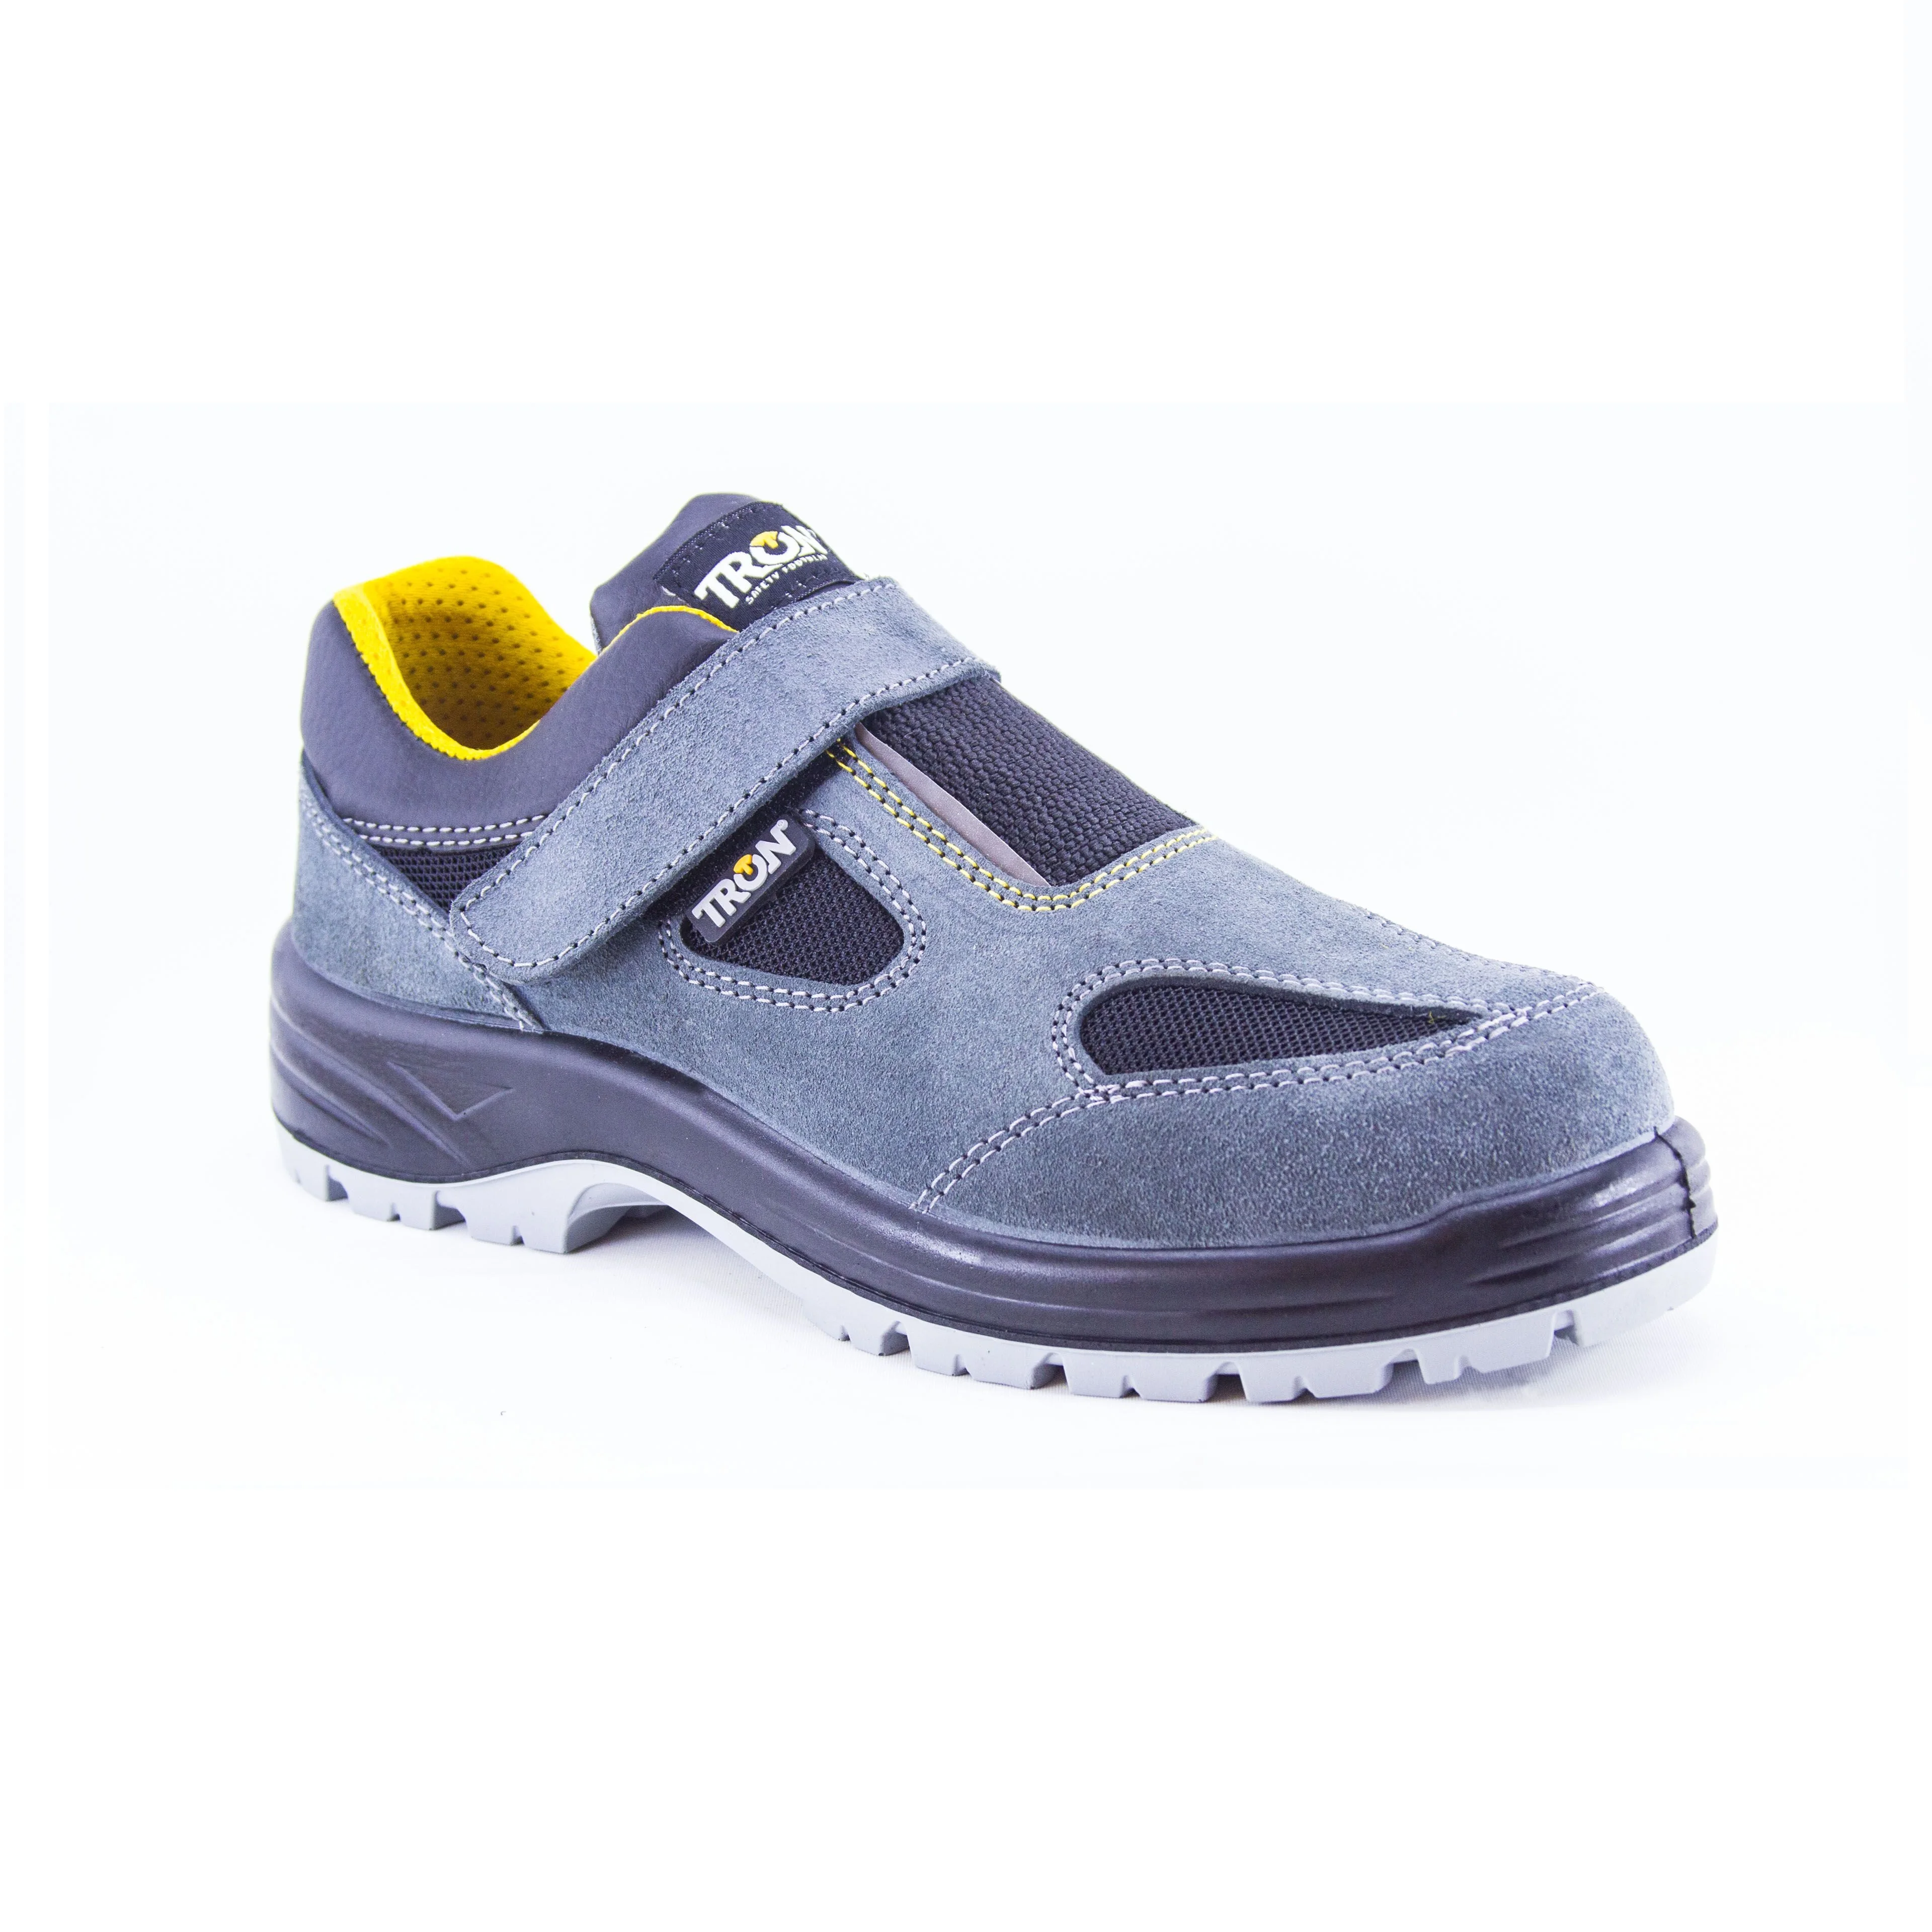 Men Shoes Safety High Quality Work 